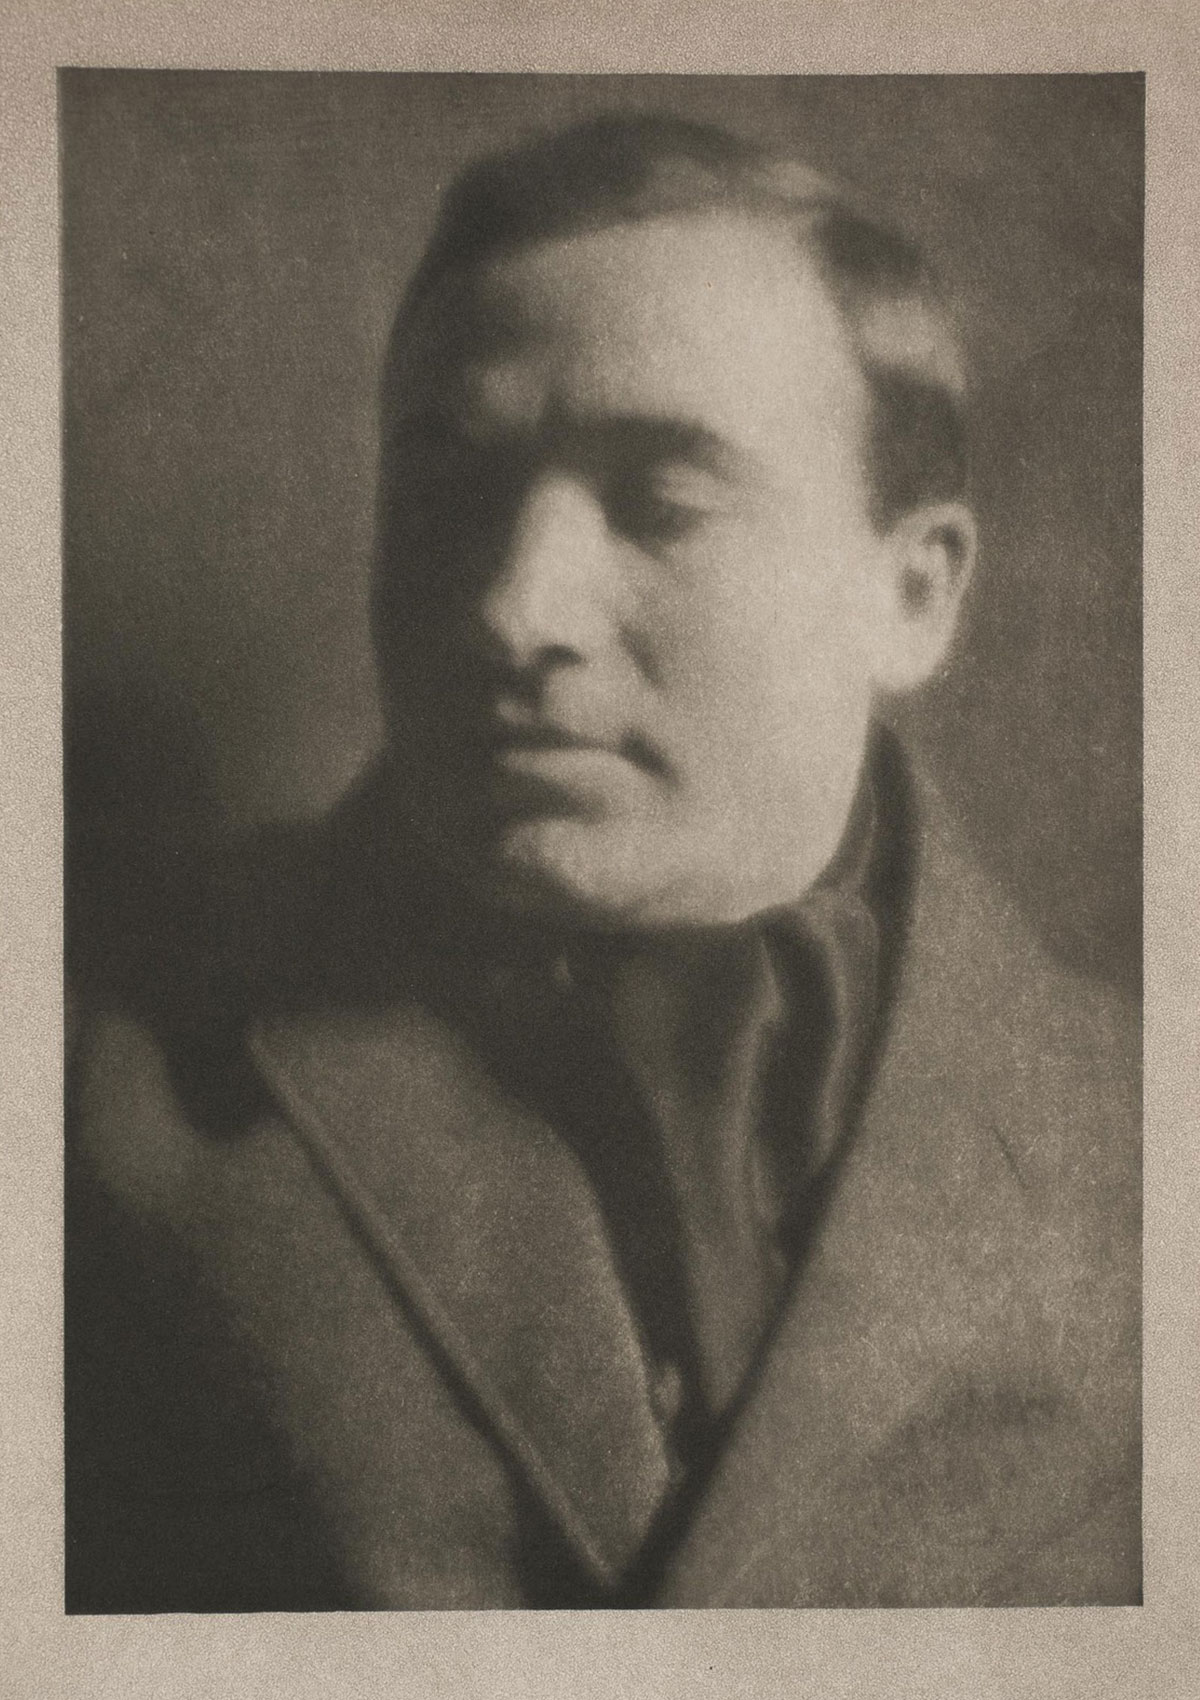 An old-fashioned portrait of a man with short hair and closed eyes, wearing a heavy jacket and ascot